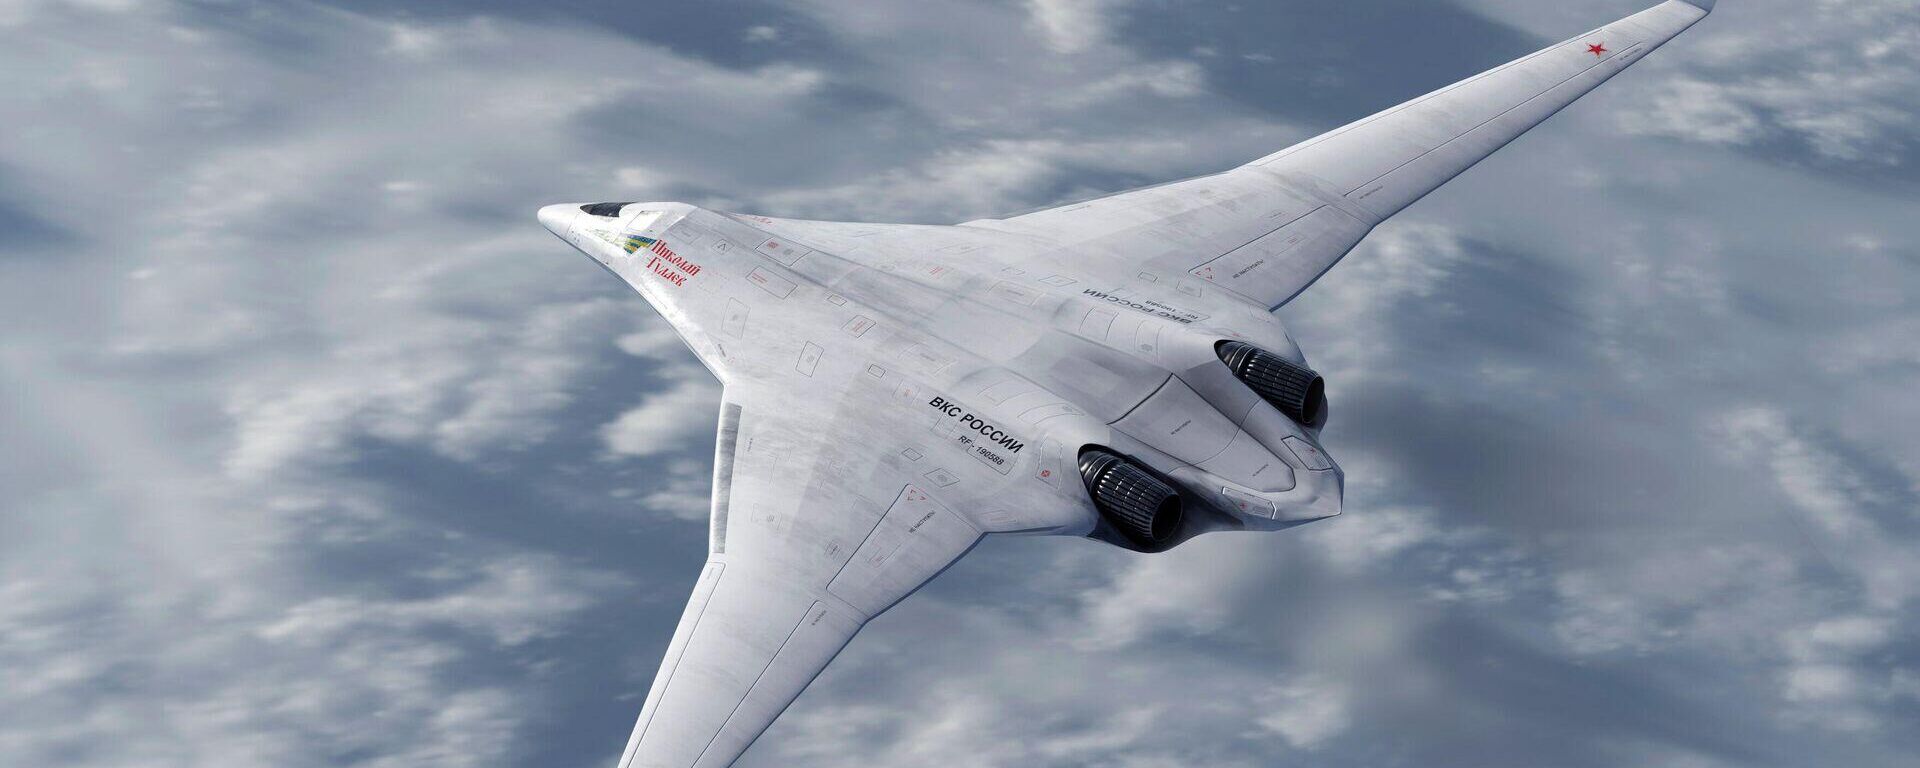 Artist's vision of the PAK-DA next-generation strategic bomber by Tupolev. The actual aircraft's dimensions and characteristics have yet to be revealed. - Sputnik International, 1920, 15.12.2023